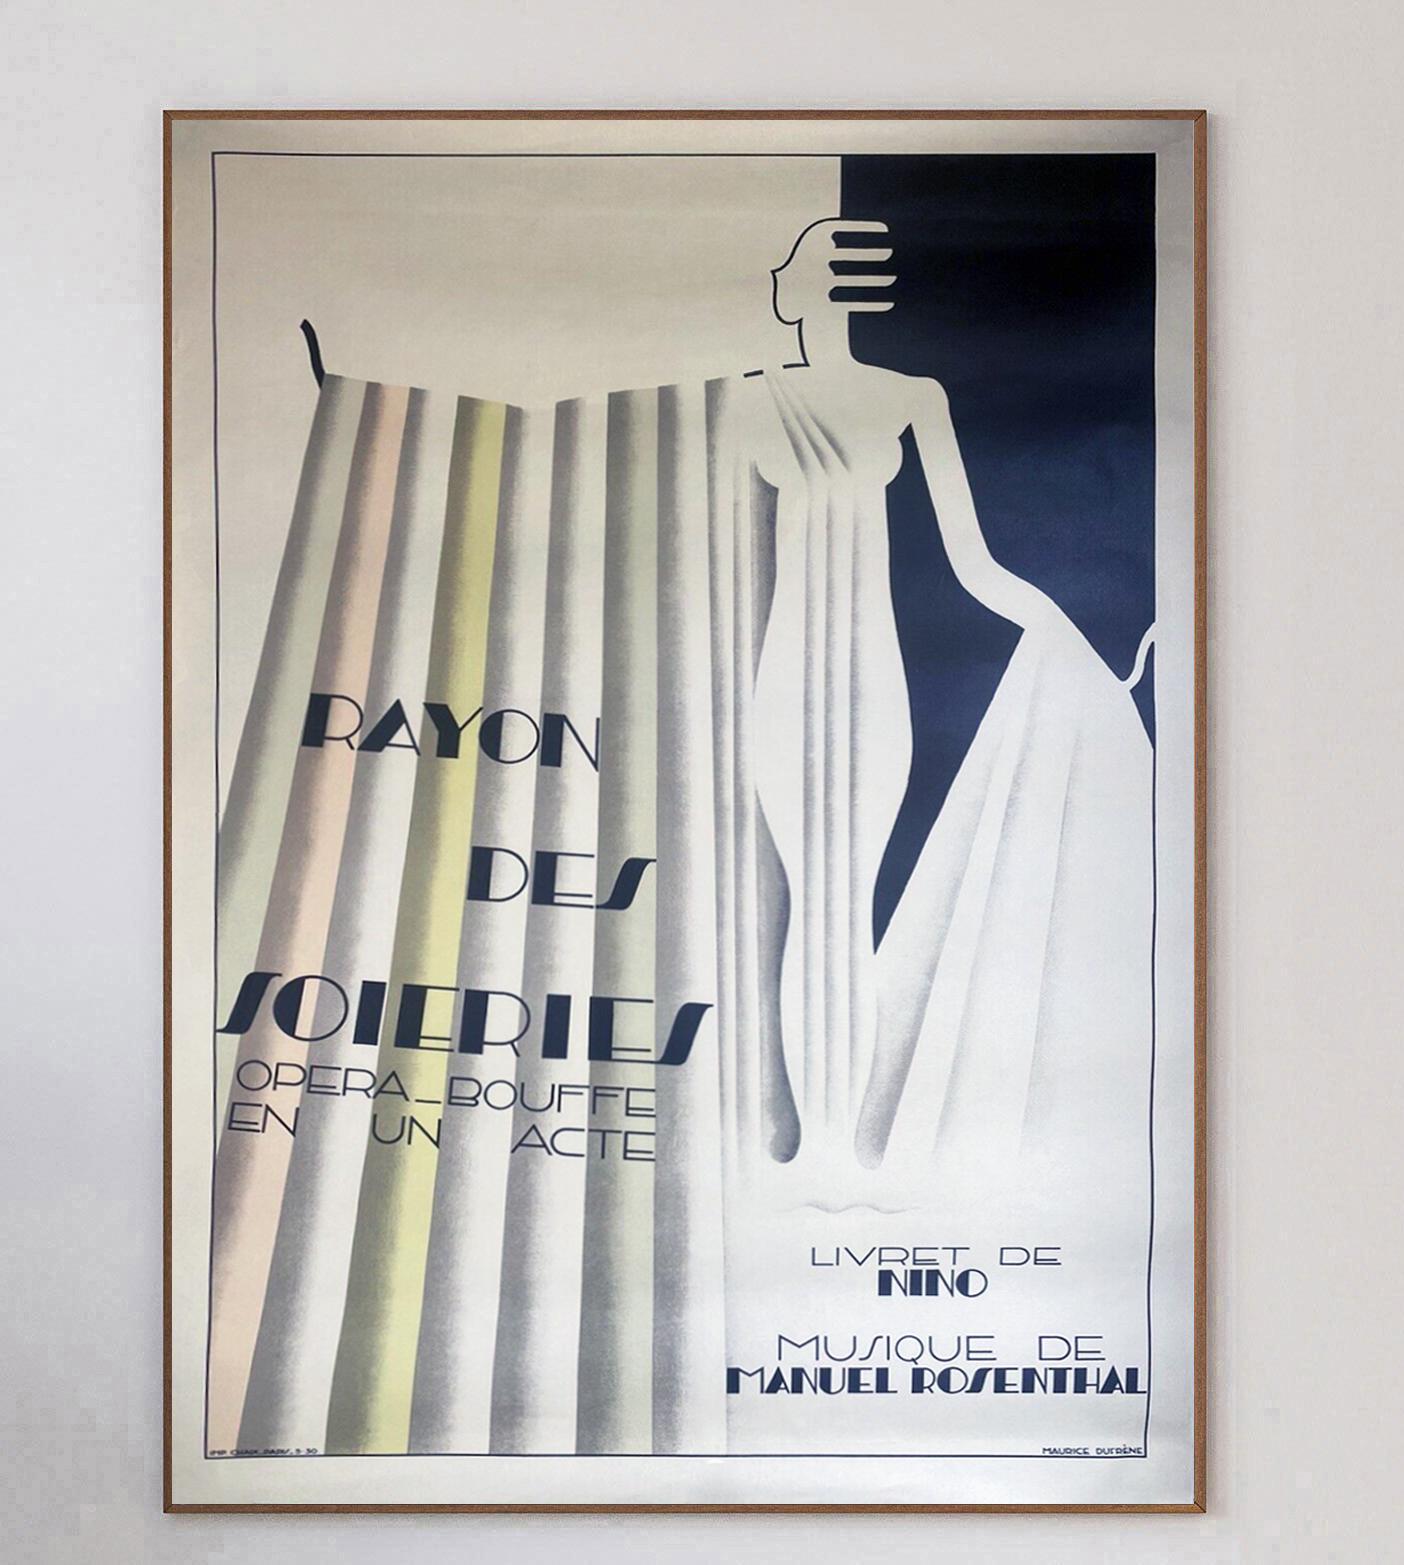 Truly beautiful poster for the Rayon Des Soieries opera at the Théâtre National de l'Opéra-Comique in Paris, France. The opera was composed by Manuael Rosenthal and the librettist was Nino for the 1930 event. The stunning art deco artwork was